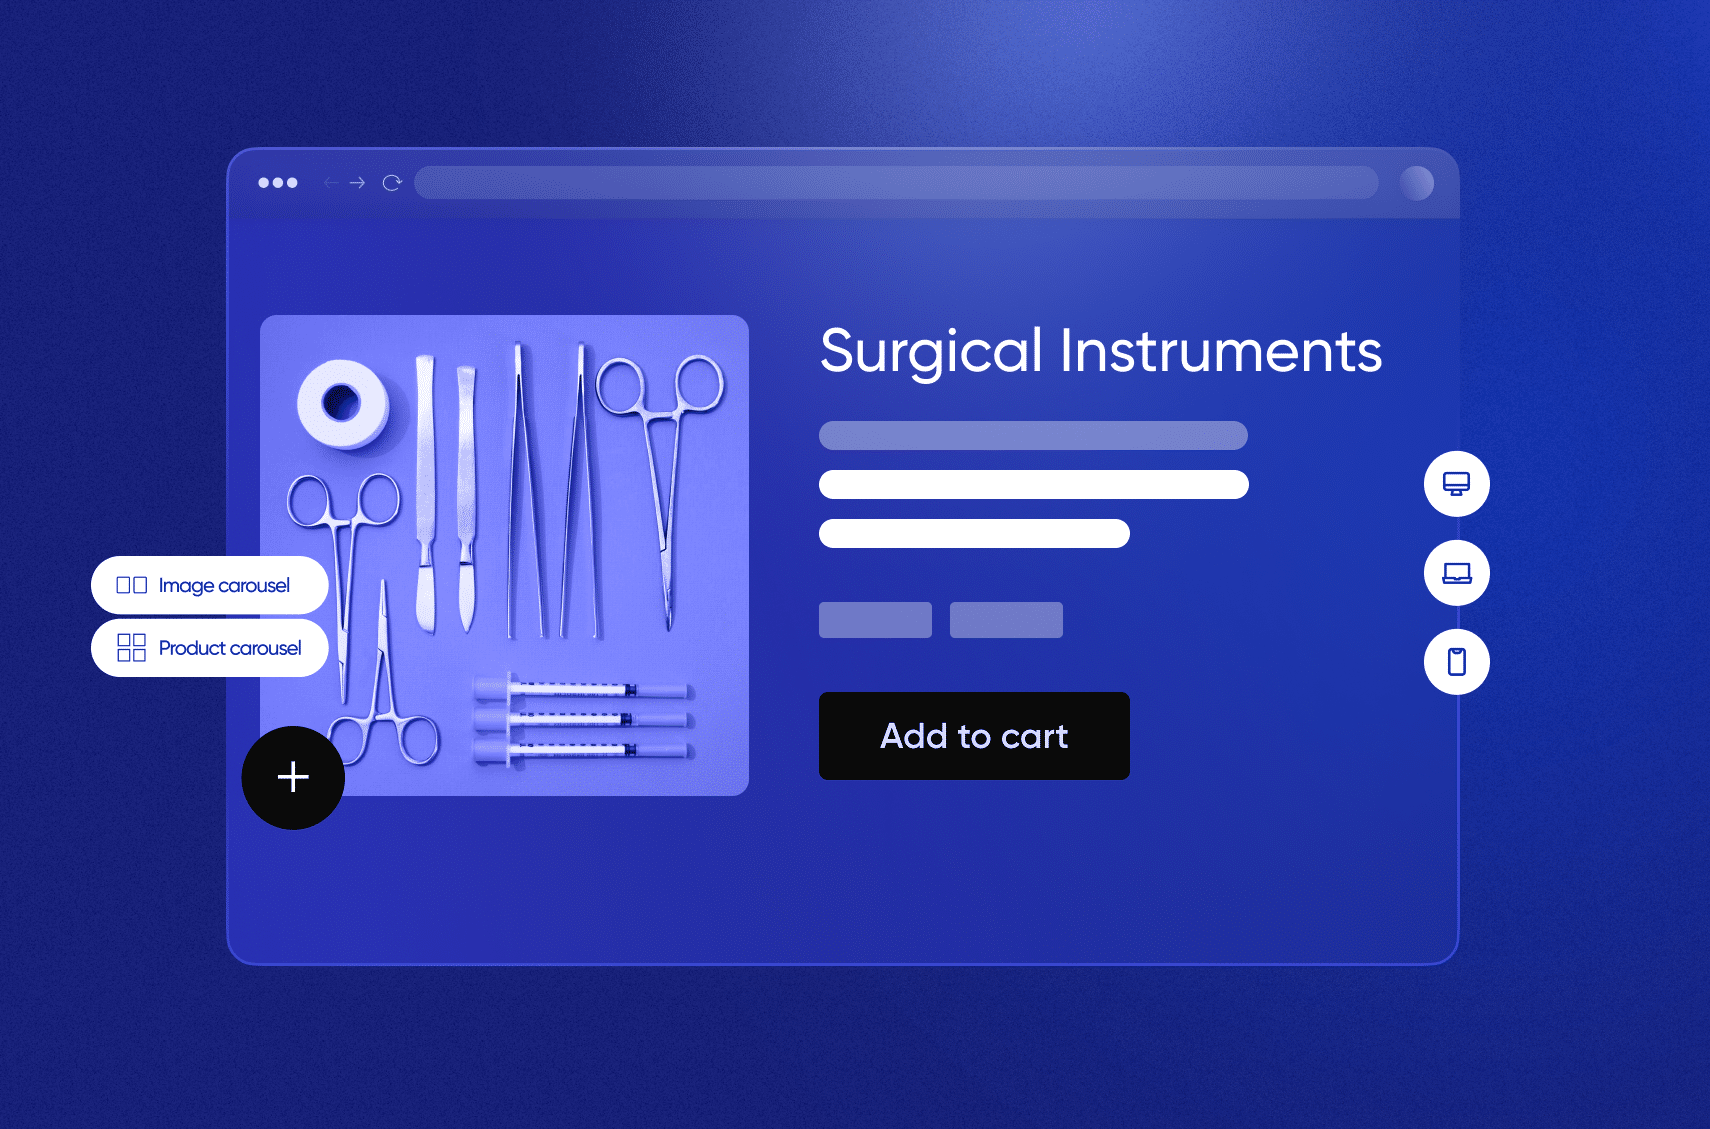 Learn how a dedicated e-commerce resource can bring e-commerce to medical equipment.